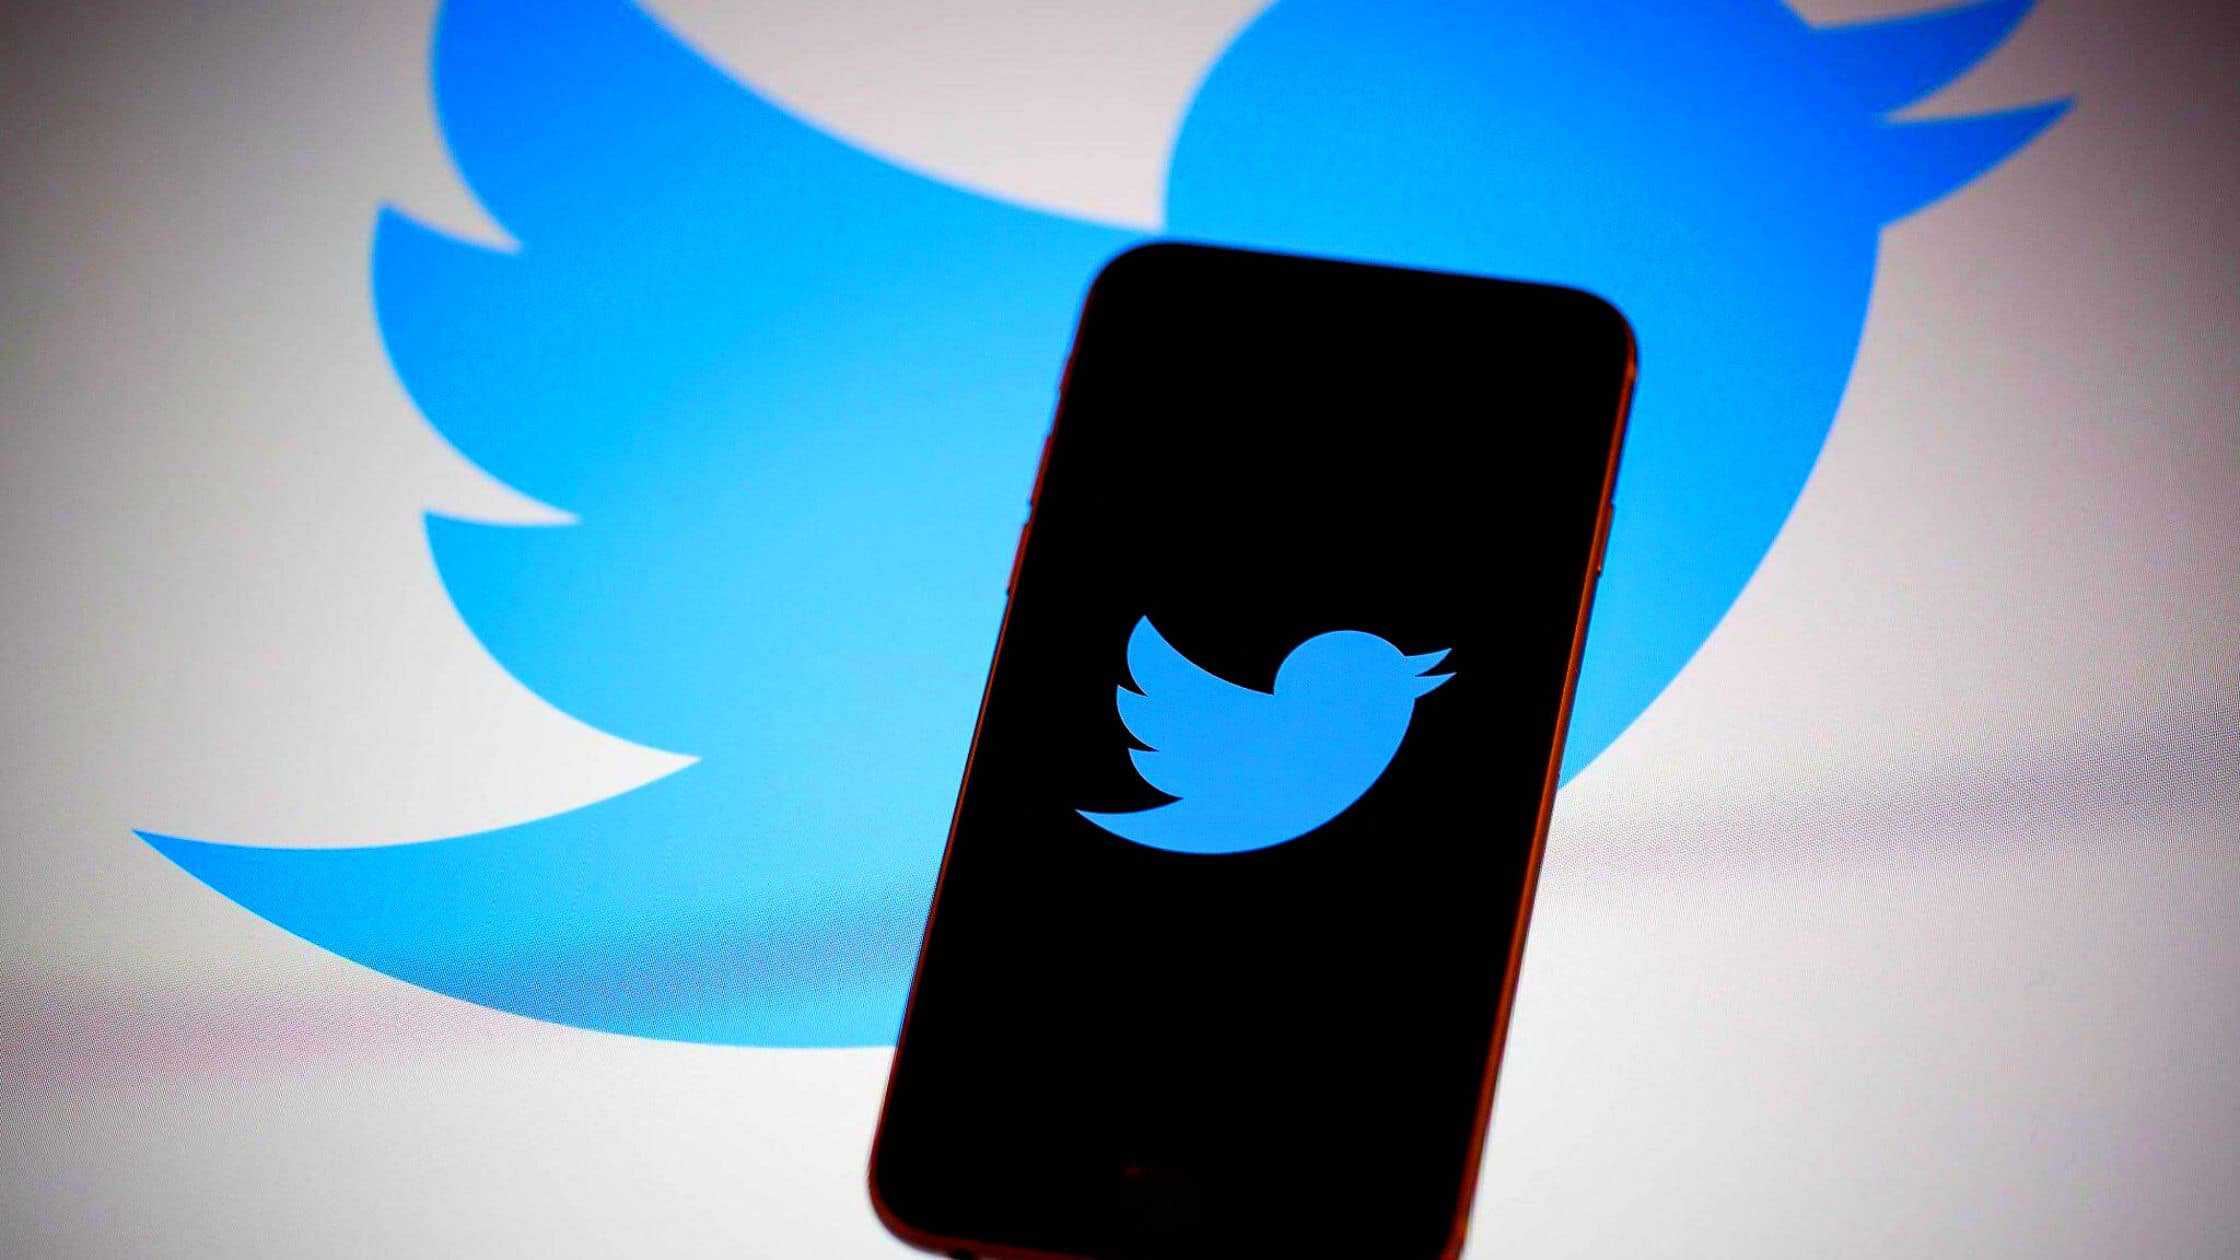 Twitter Adds New Feature To The Search Function